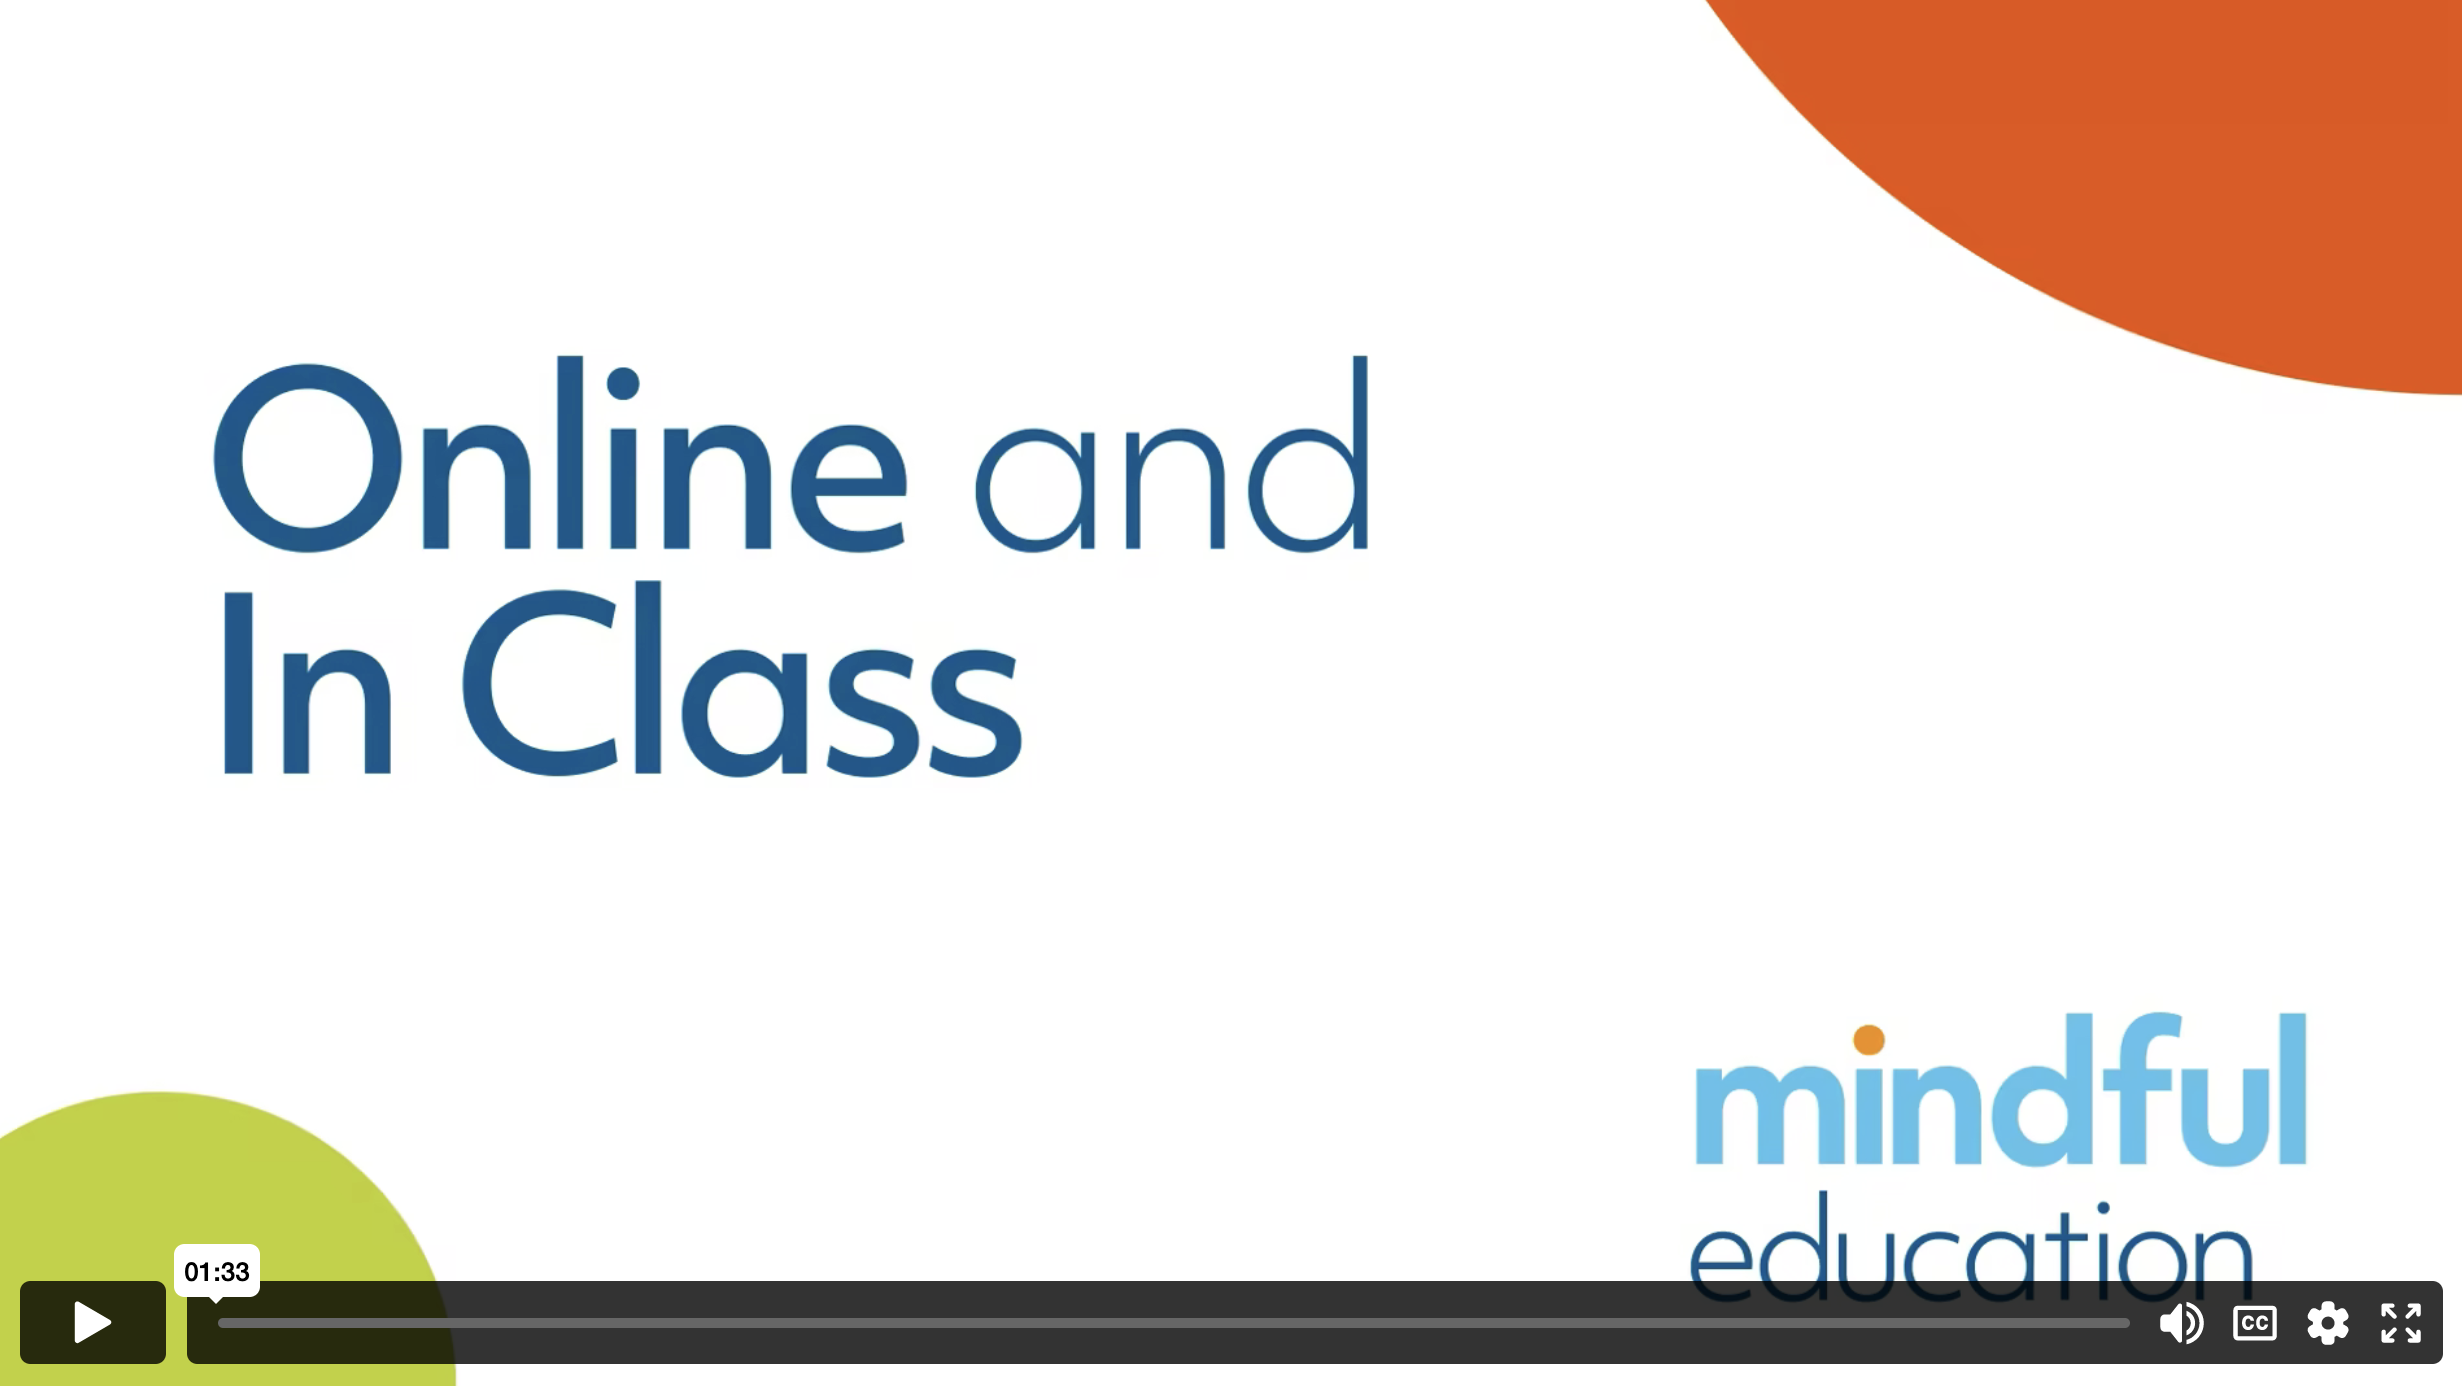 Mindful Education video placeholder graphic